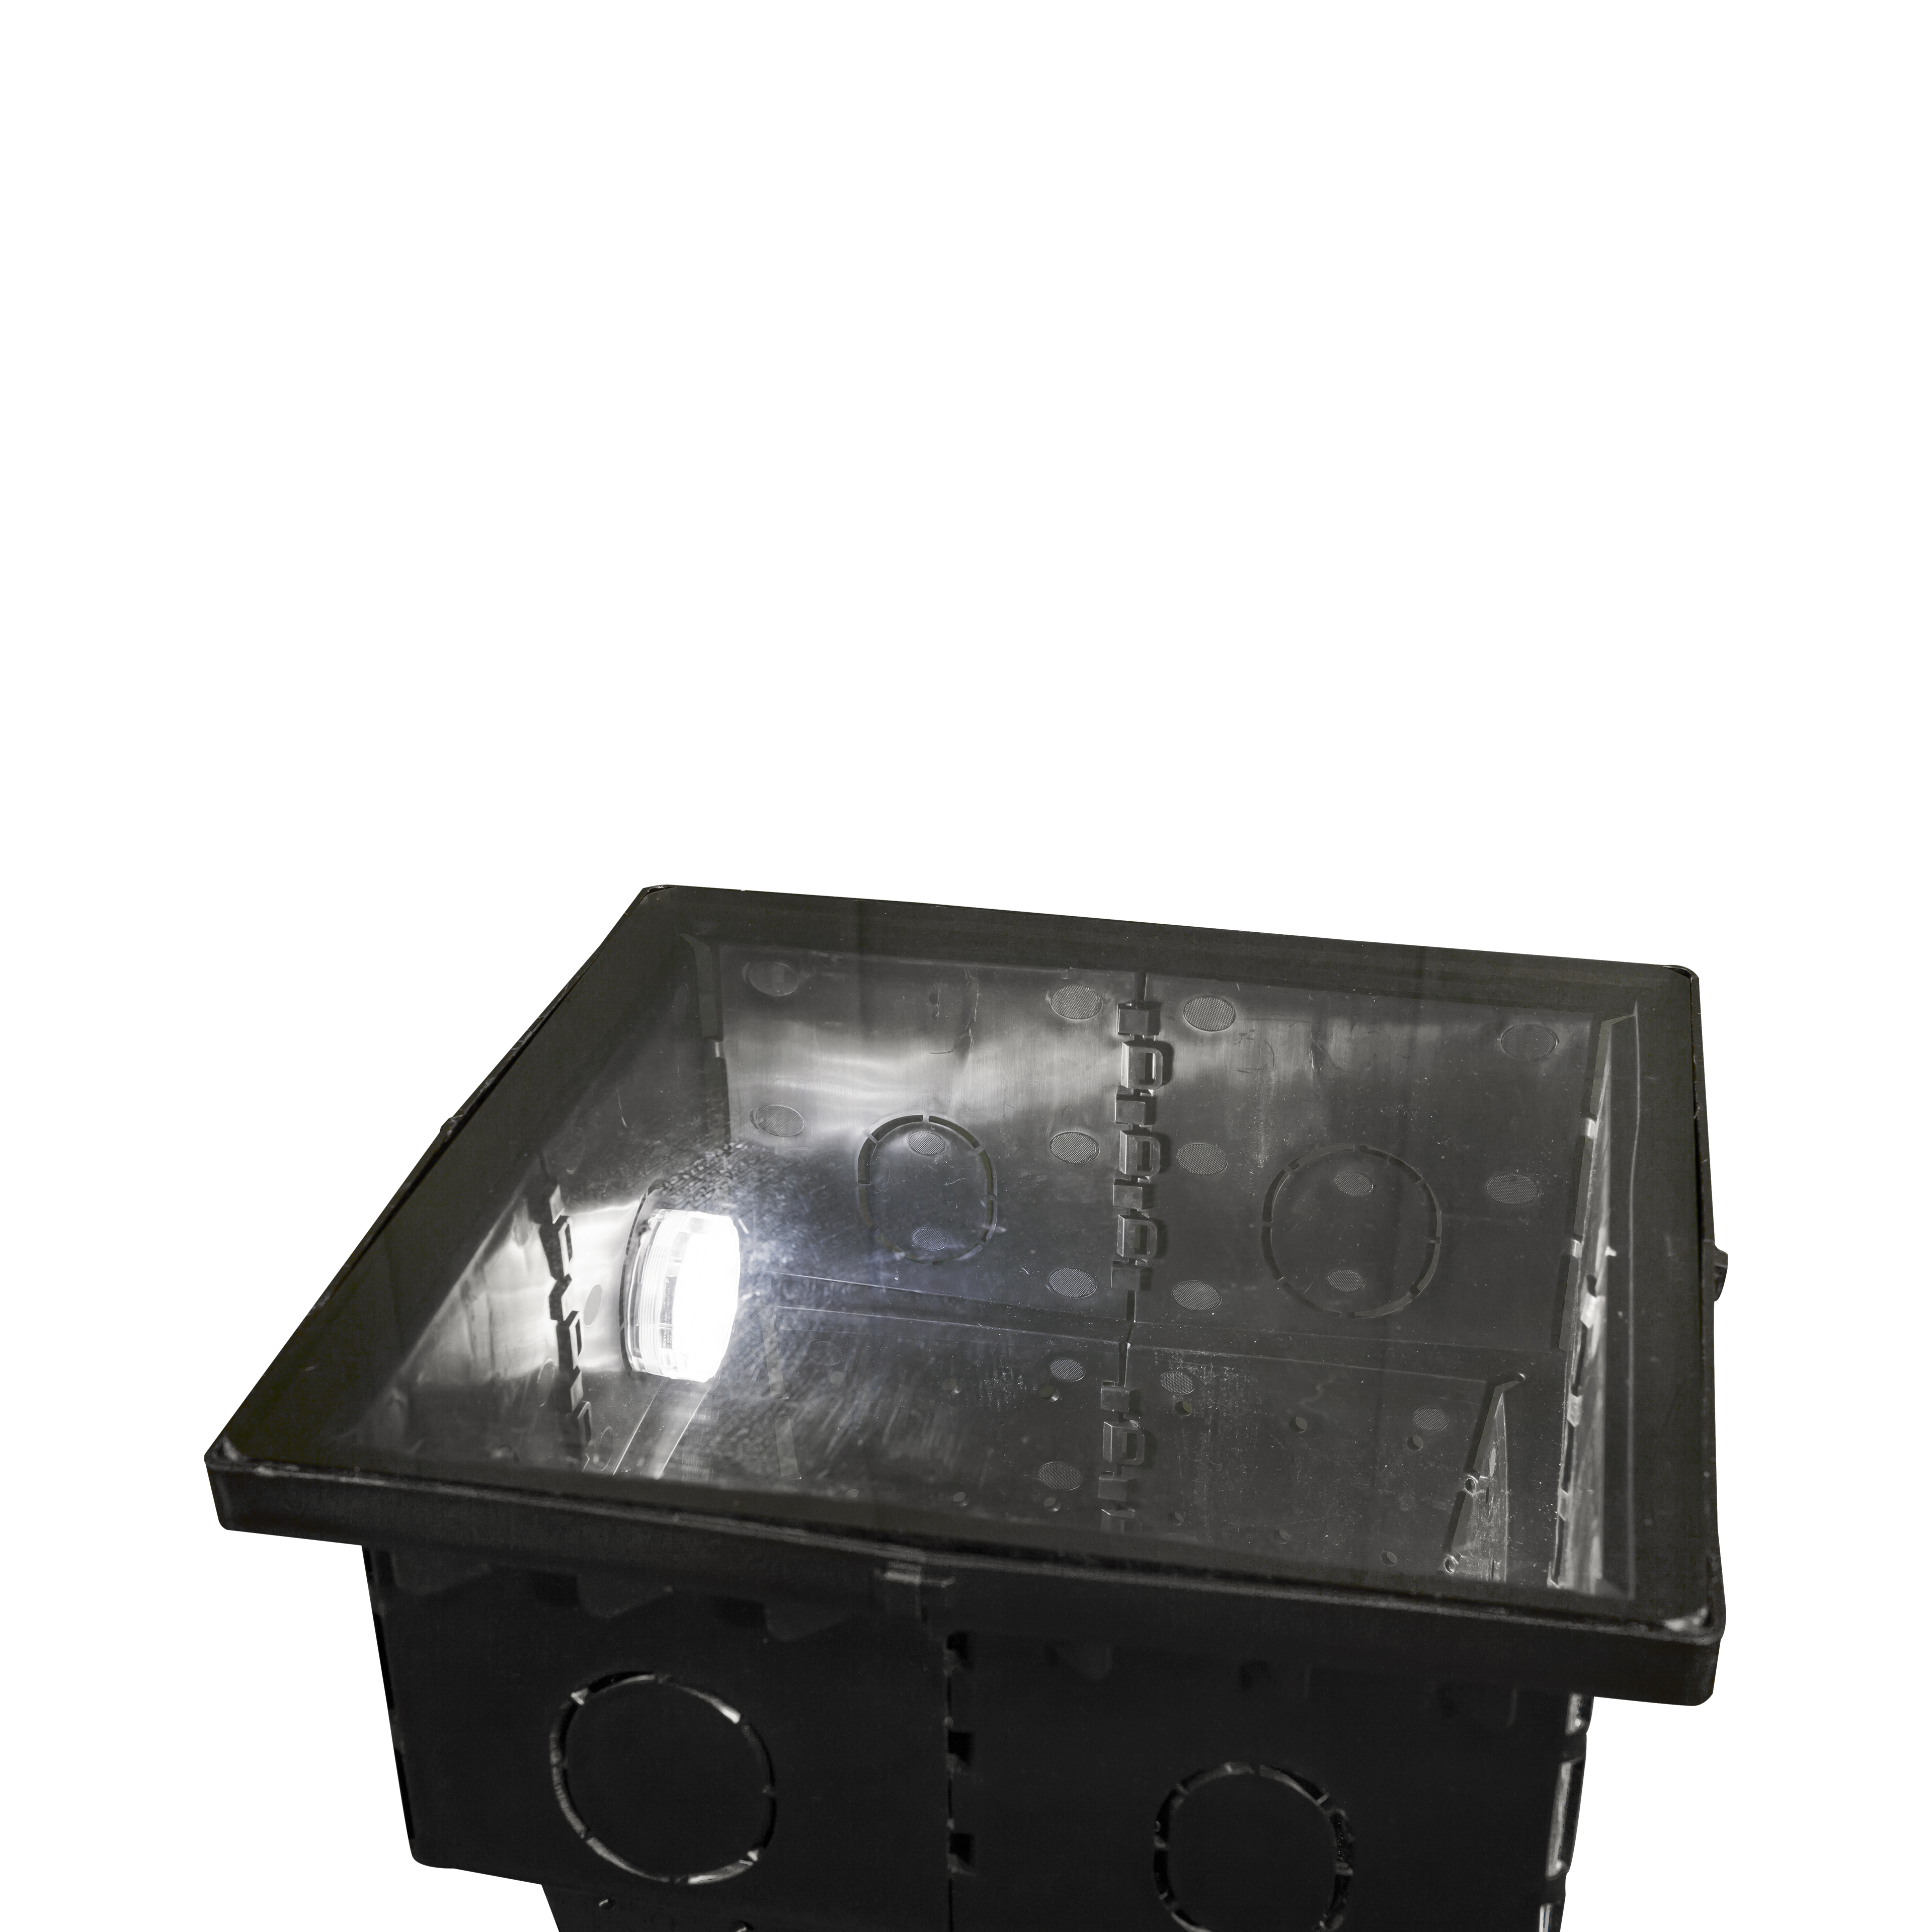 Sump pit with square solid see through lid and submersible LED light